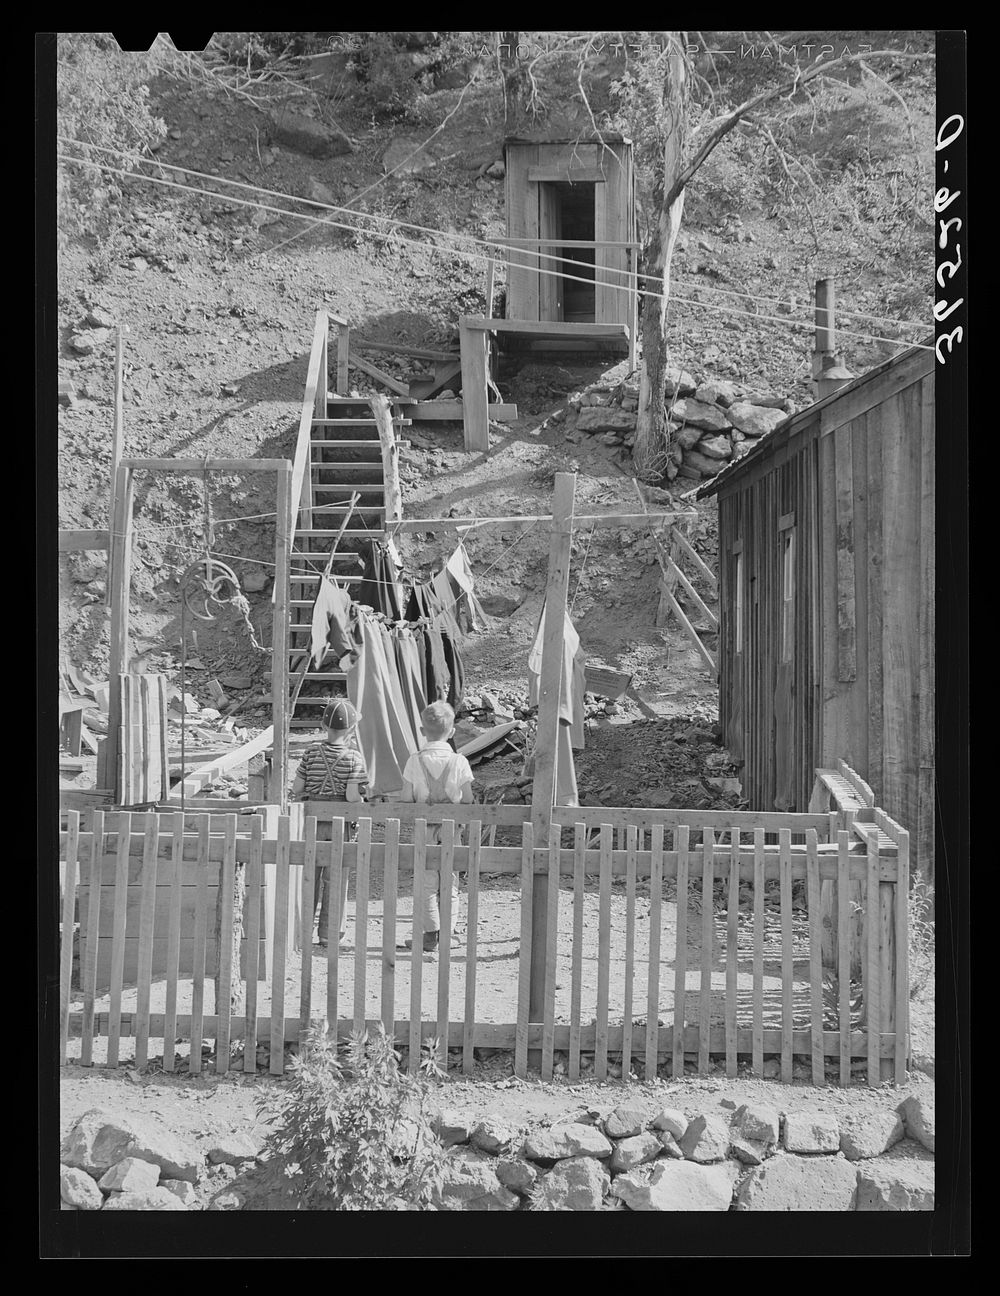 [Untitled photo, possibly related to: Backyard of house with steps leading up the hill to privy. Mogollon, New Mexico] by…